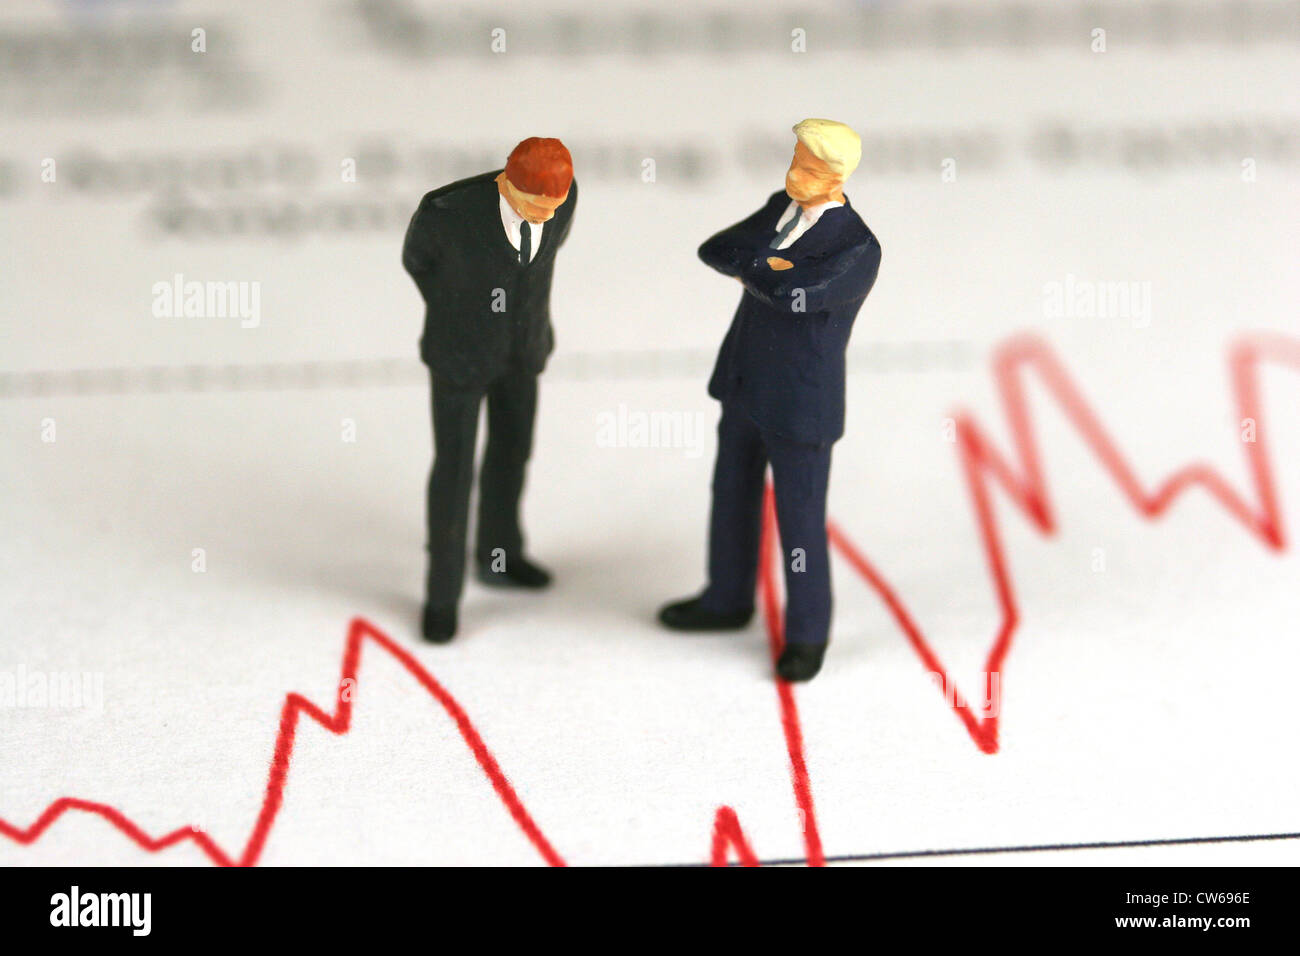 symbolic picture finance crises, share price with manager figures Stock Photo